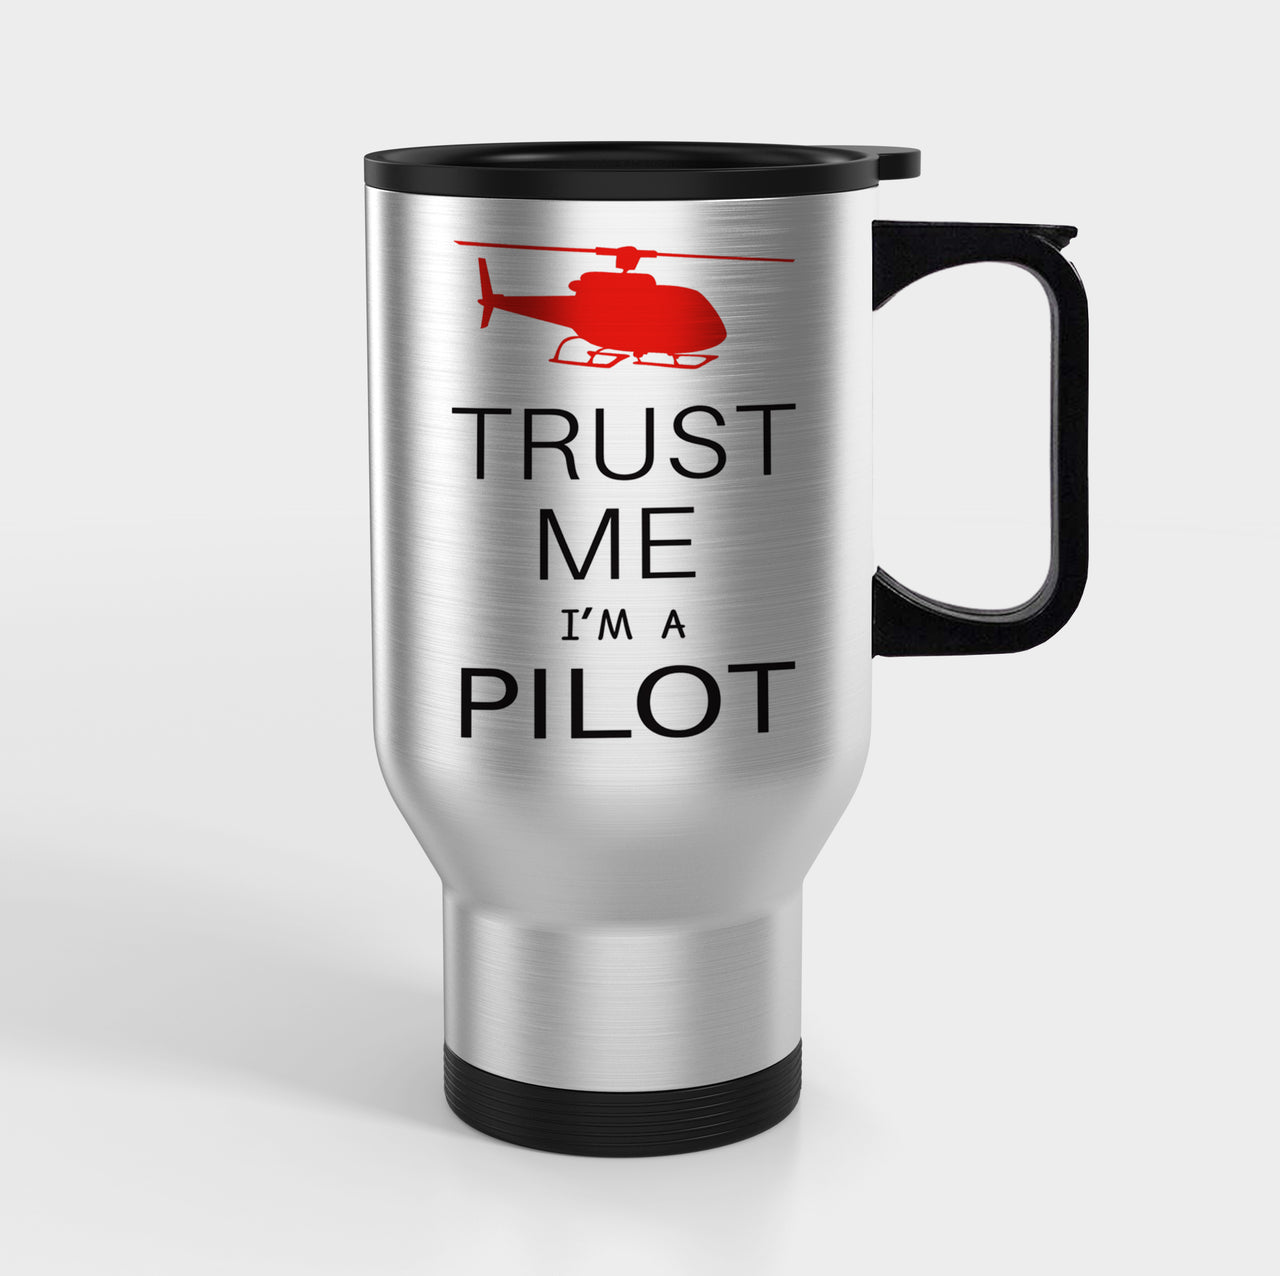 Trust Me I'm a Pilot (Helicopter) Designed Travel Mugs (With Holder)